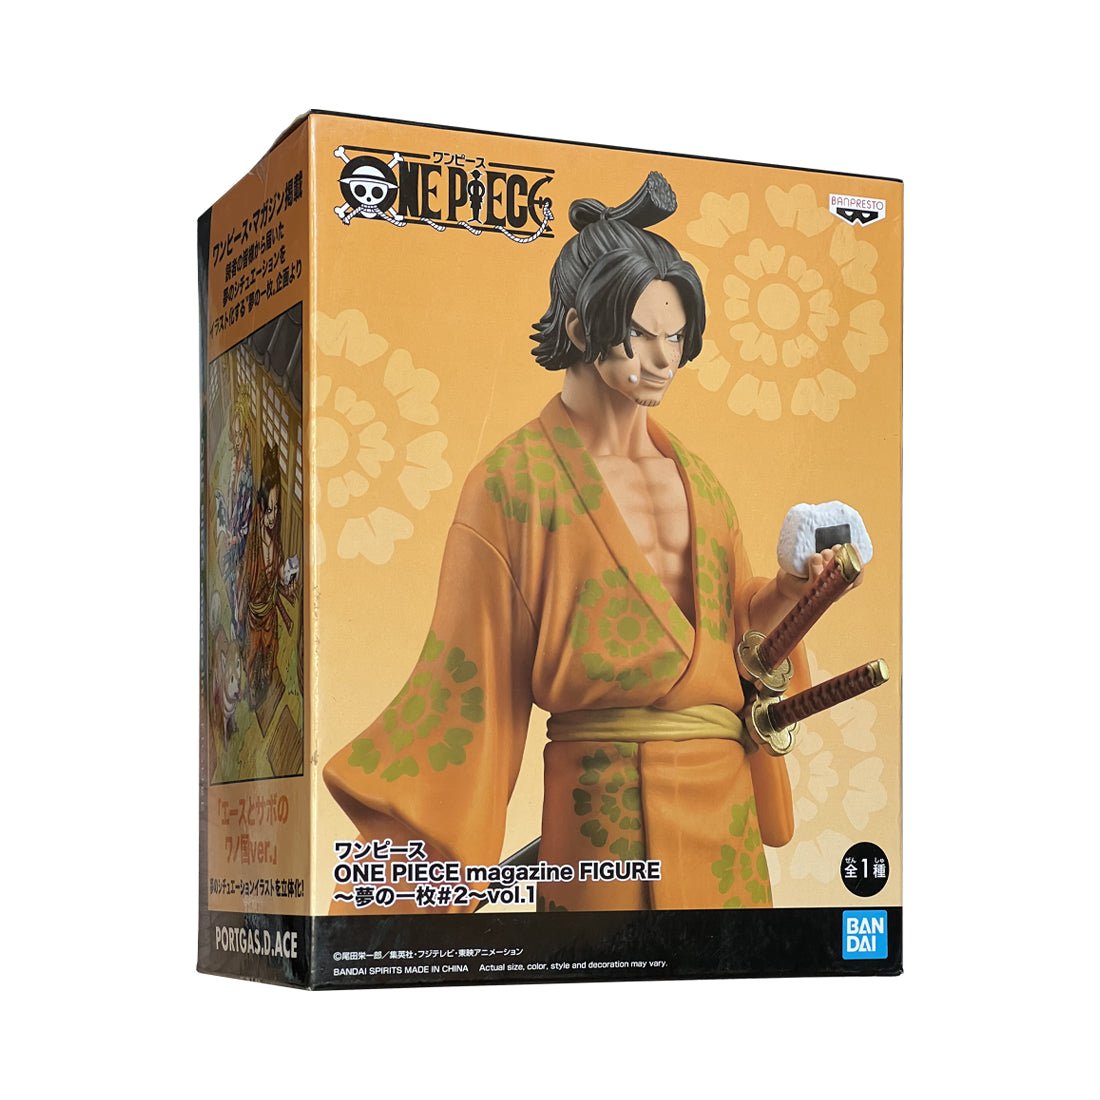 (Pre-Owned) Banpresto One Piece: Portogas D. Ace Figure - Small - مجسم مستعمل - Store 974 | ستور ٩٧٤